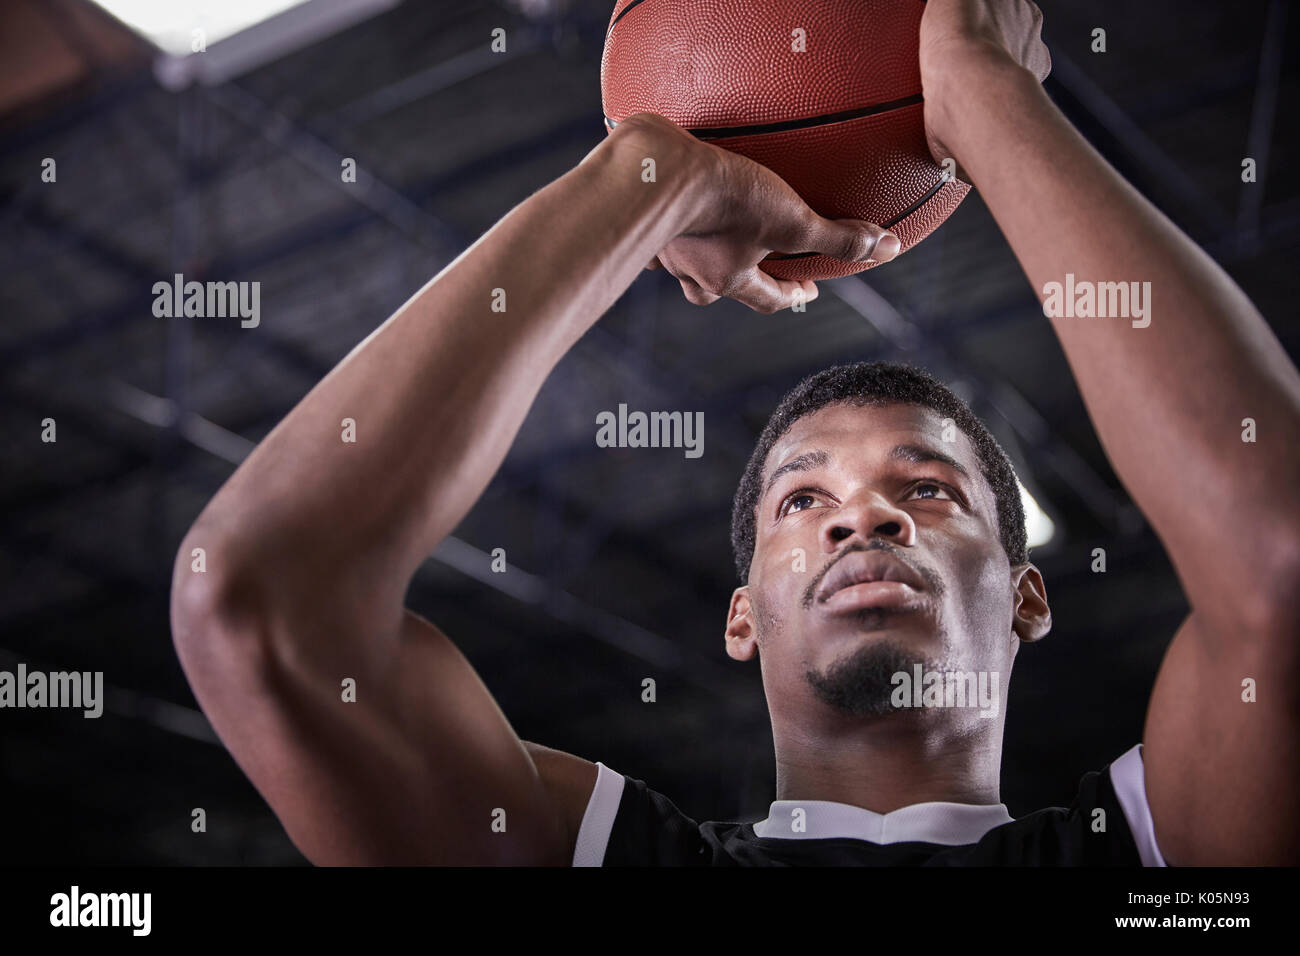 Focused young male basketball player shooting free throw Stock Photo